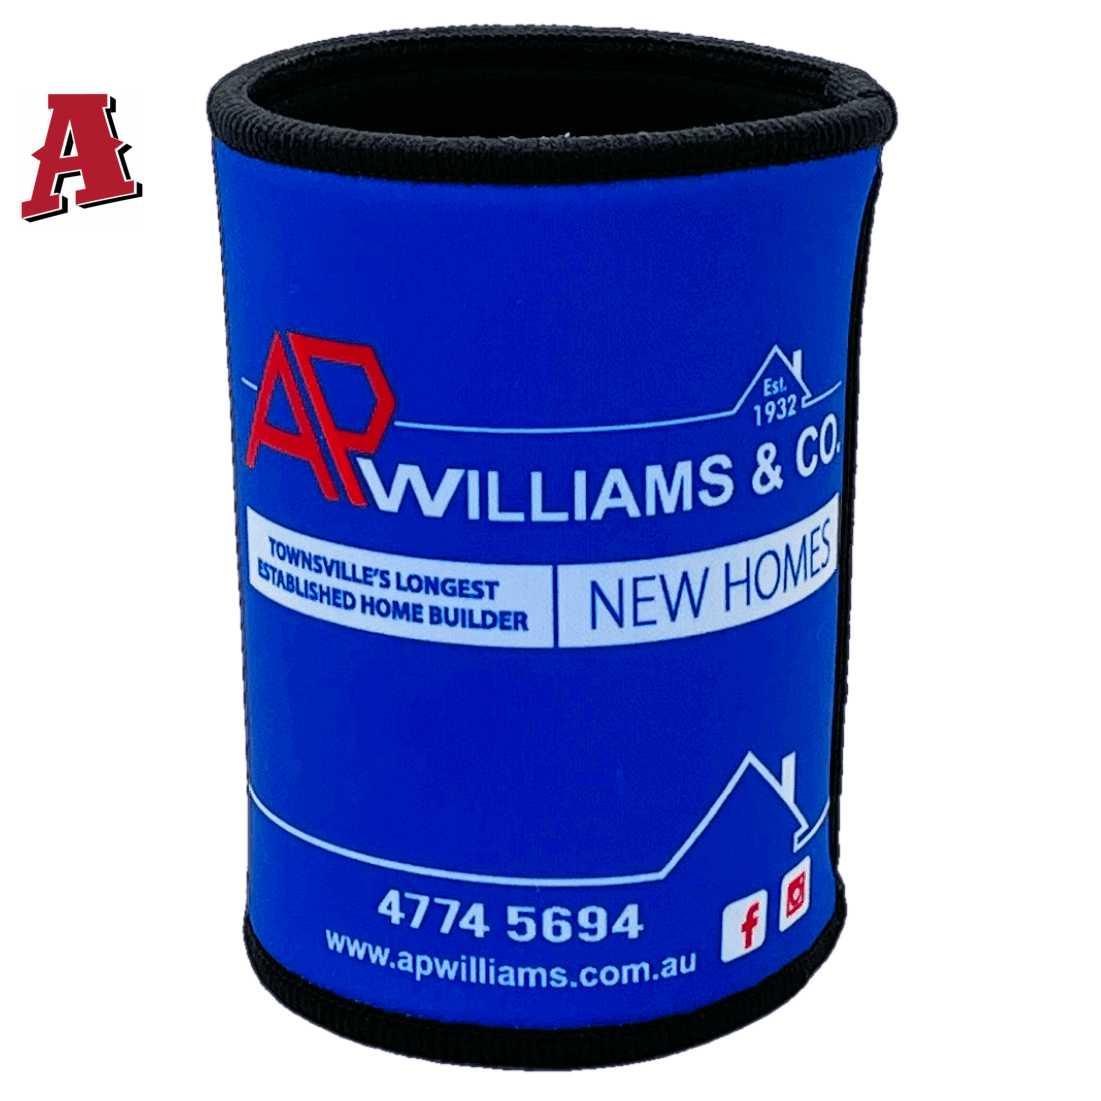 AP Williams Co Mount Louisa QLD Custom Stubby Holders 5mm Neoprene with Stitched Top and Bottom Seams Royal Blue